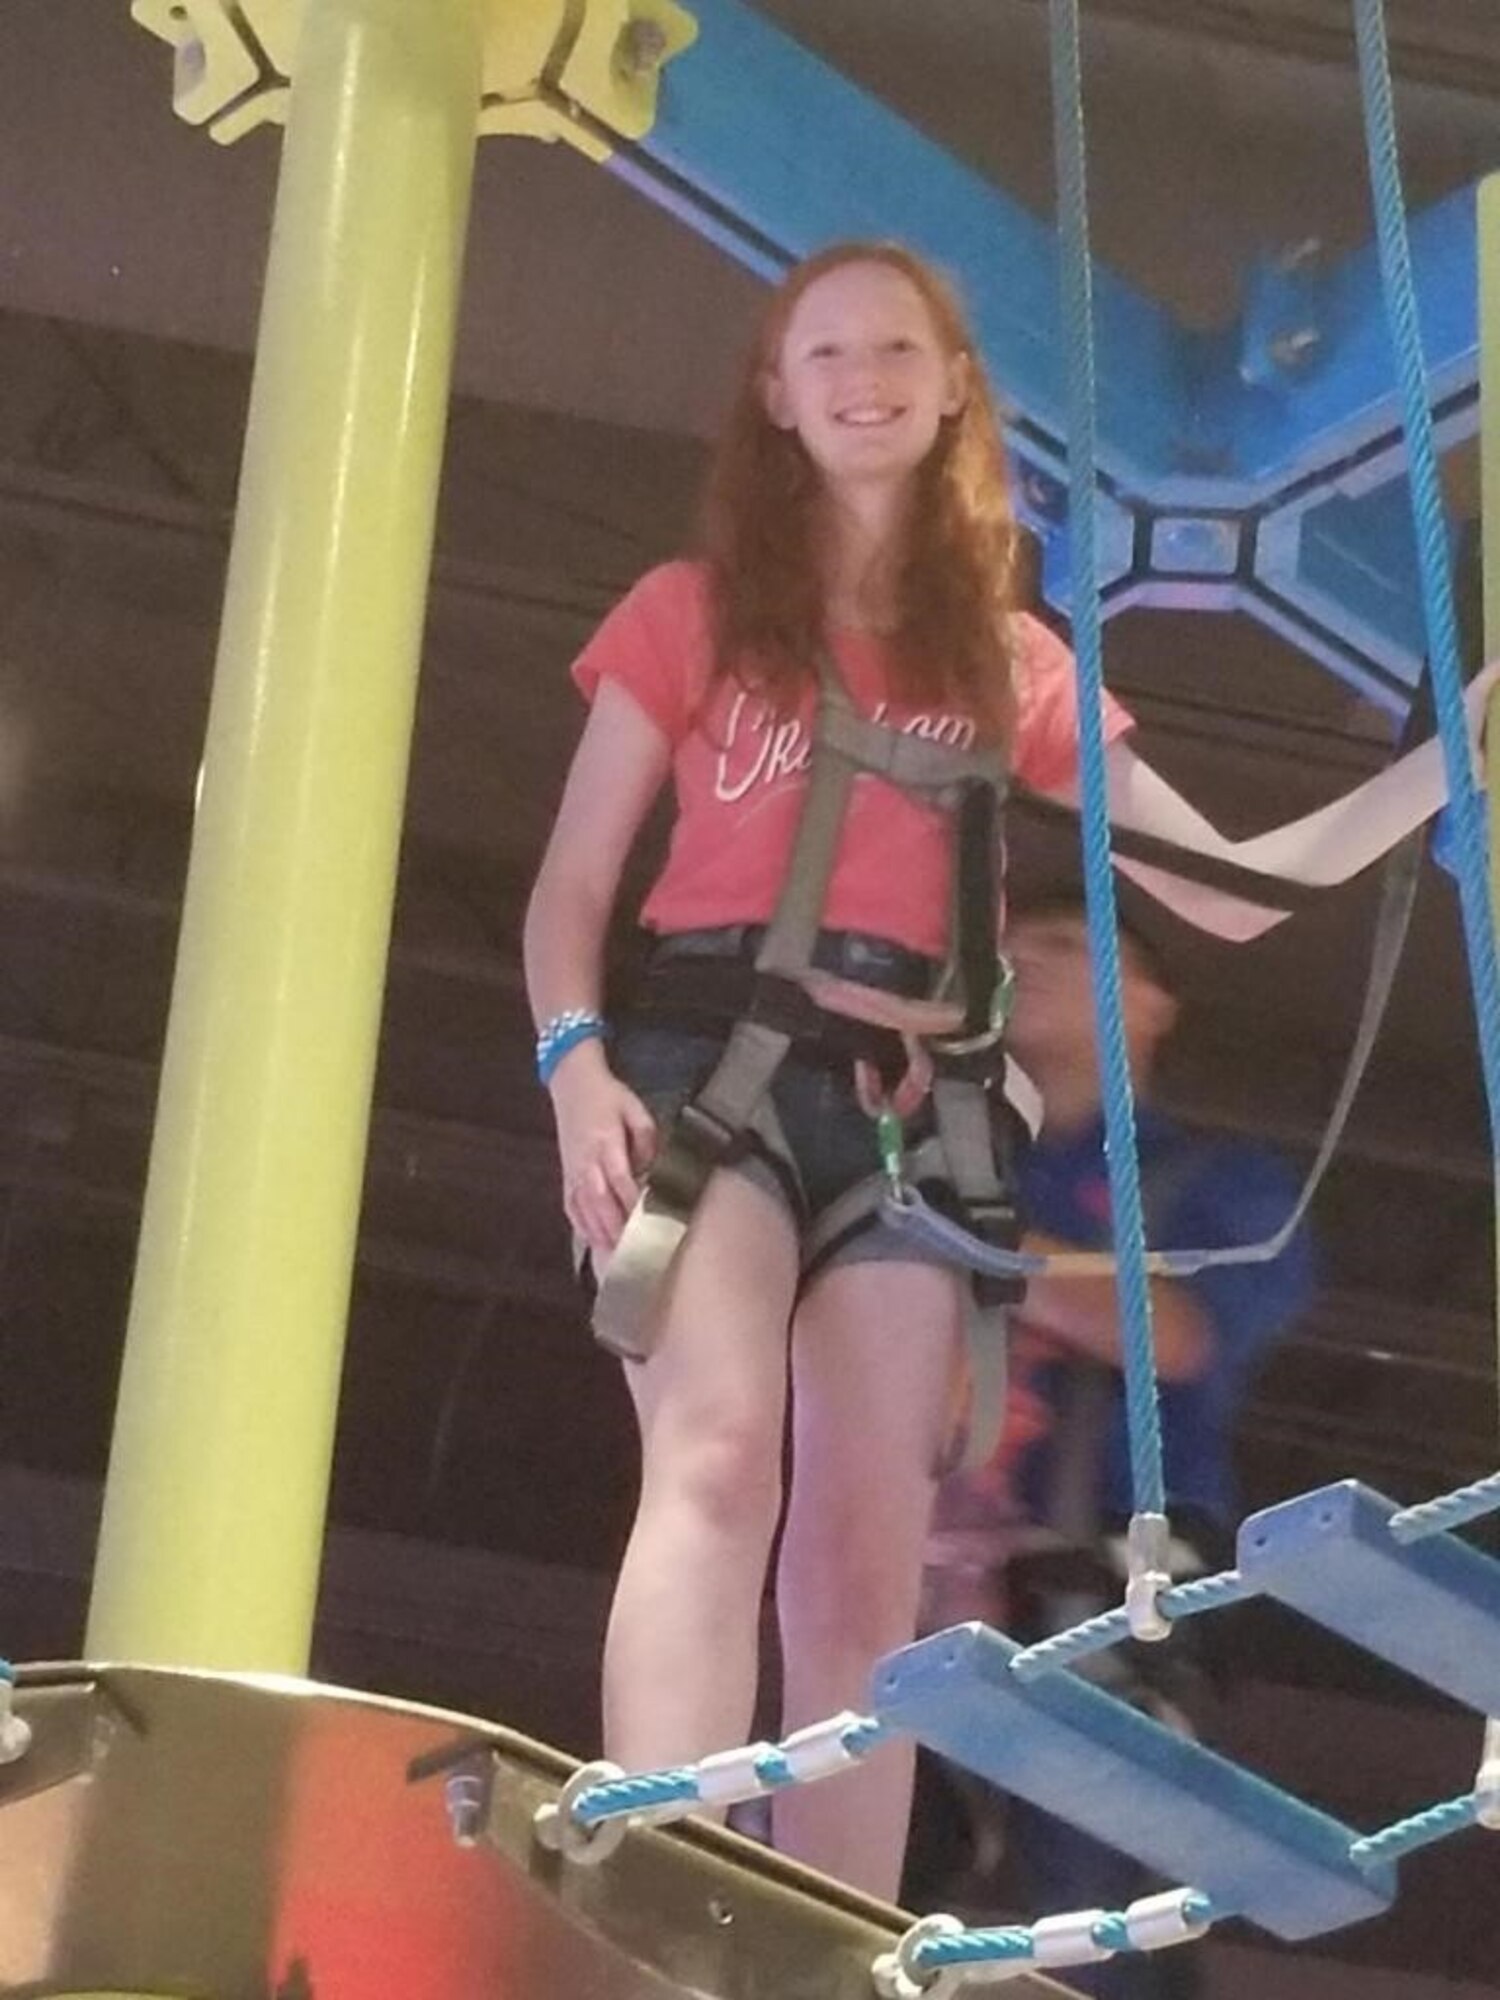 Hannah Bradley, 97th Air Mobility 2018 Youth of the Year, climbs an obstacle course as part of a field trip put on through the Altus Air Force Base Youth Programs. (Courtesy photo by Shawna Heiser)